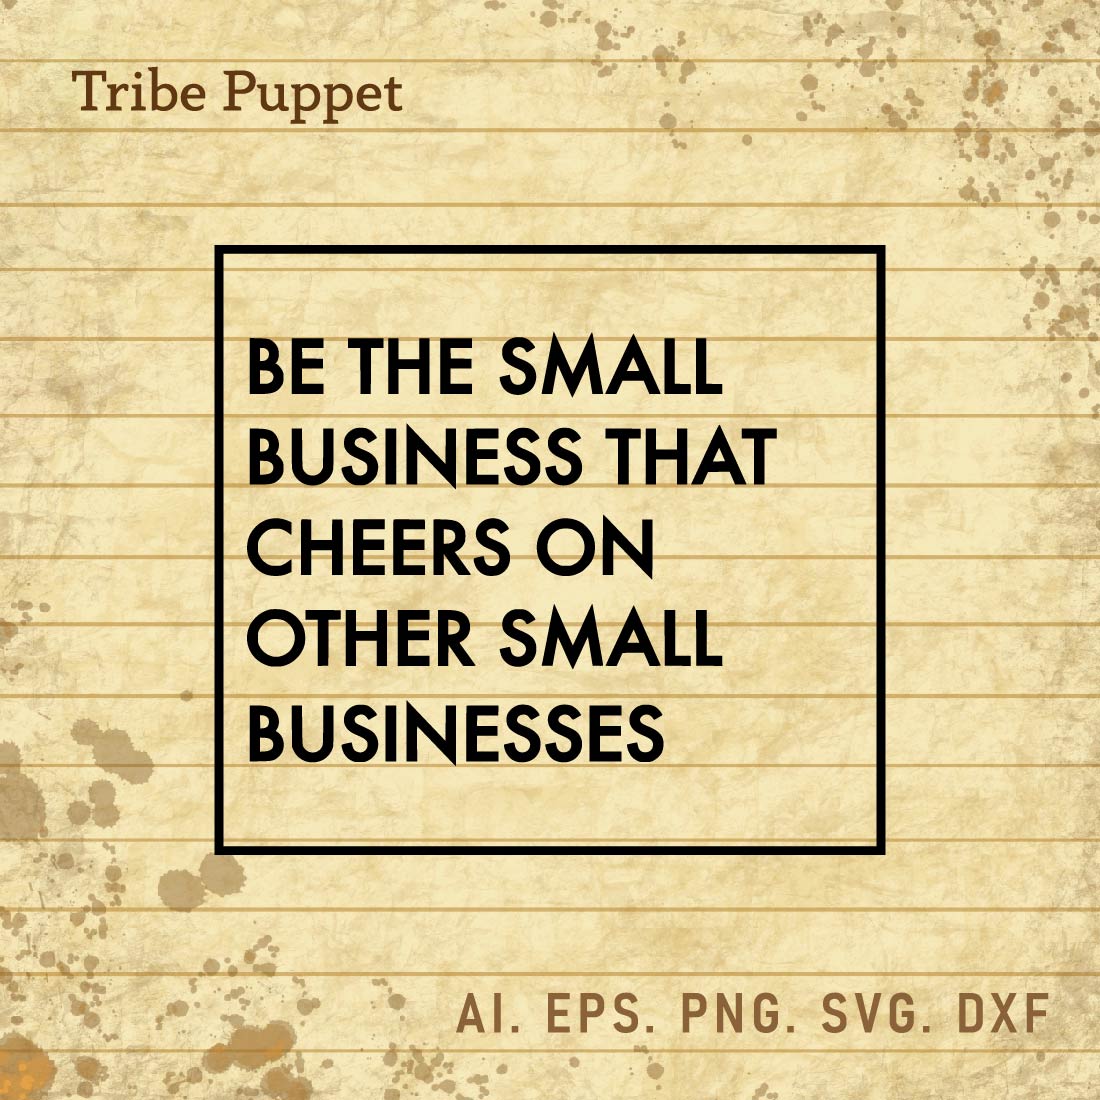 Small business Quotes cover image.